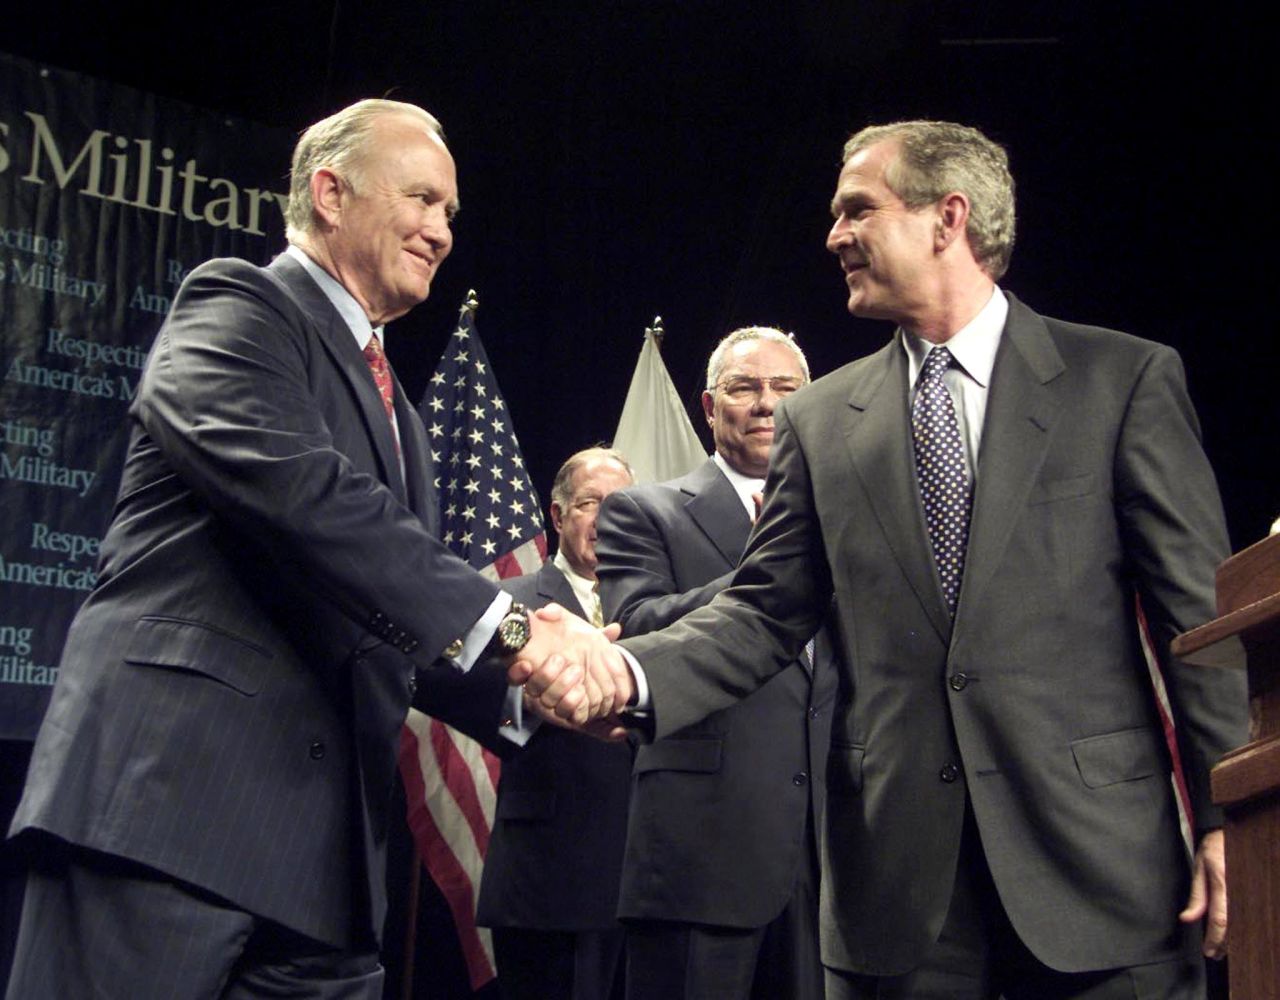 Republican presidential candidate and Texas Gov. George W. Bush and Schwarzkopf on stage after their speeches to veterans at Wright State University in Dayton, Ohio, on September 7, 2000. 